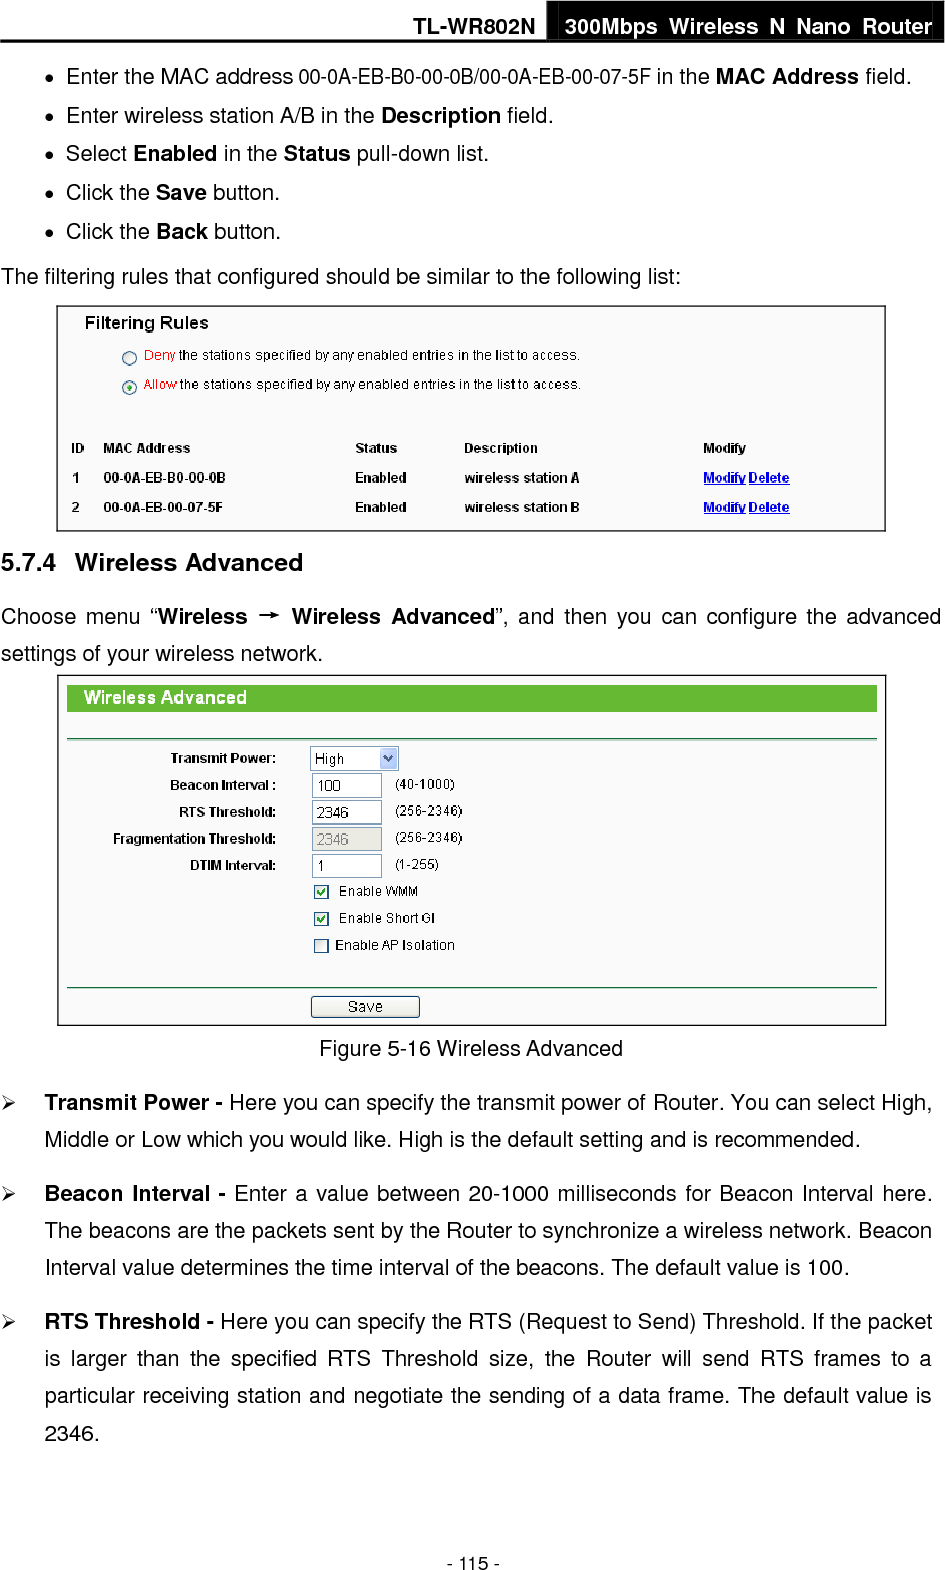 TL-WR802N 300Mbps  Wireless  N  Nano  Router  - 115 -  Enter the MAC address 00-0A-EB-B0-00-0B/00-0A-EB-00-07-5F in the MAC Address field.  Enter wireless station A/B in the Description field.  Select Enabled in the Status pull-down list.  Click the Save button.  Click the Back button. The filtering rules that configured should be similar to the following list:  5.7.4  Wireless Advanced Choose menu  “Wireless  →  Wireless  Advanced”, and  then  you can  configure  the advanced settings of your wireless network.  Figure 5-16 Wireless Advanced  Transmit Power - Here you can specify the transmit power of Router. You can select High, Middle or Low which you would like. High is the default setting and is recommended.  Beacon Interval - Enter a value between 20-1000 milliseconds for Beacon Interval here. The beacons are the packets sent by the Router to synchronize a wireless network. Beacon Interval value determines the time interval of the beacons. The default value is 100.    RTS Threshold - Here you can specify the RTS (Request to Send) Threshold. If the packet is  larger  than  the  specified  RTS  Threshold  size,  the  Router  will  send  RTS  frames  to  a particular receiving station and negotiate the sending of a data frame. The default value is 2346.   